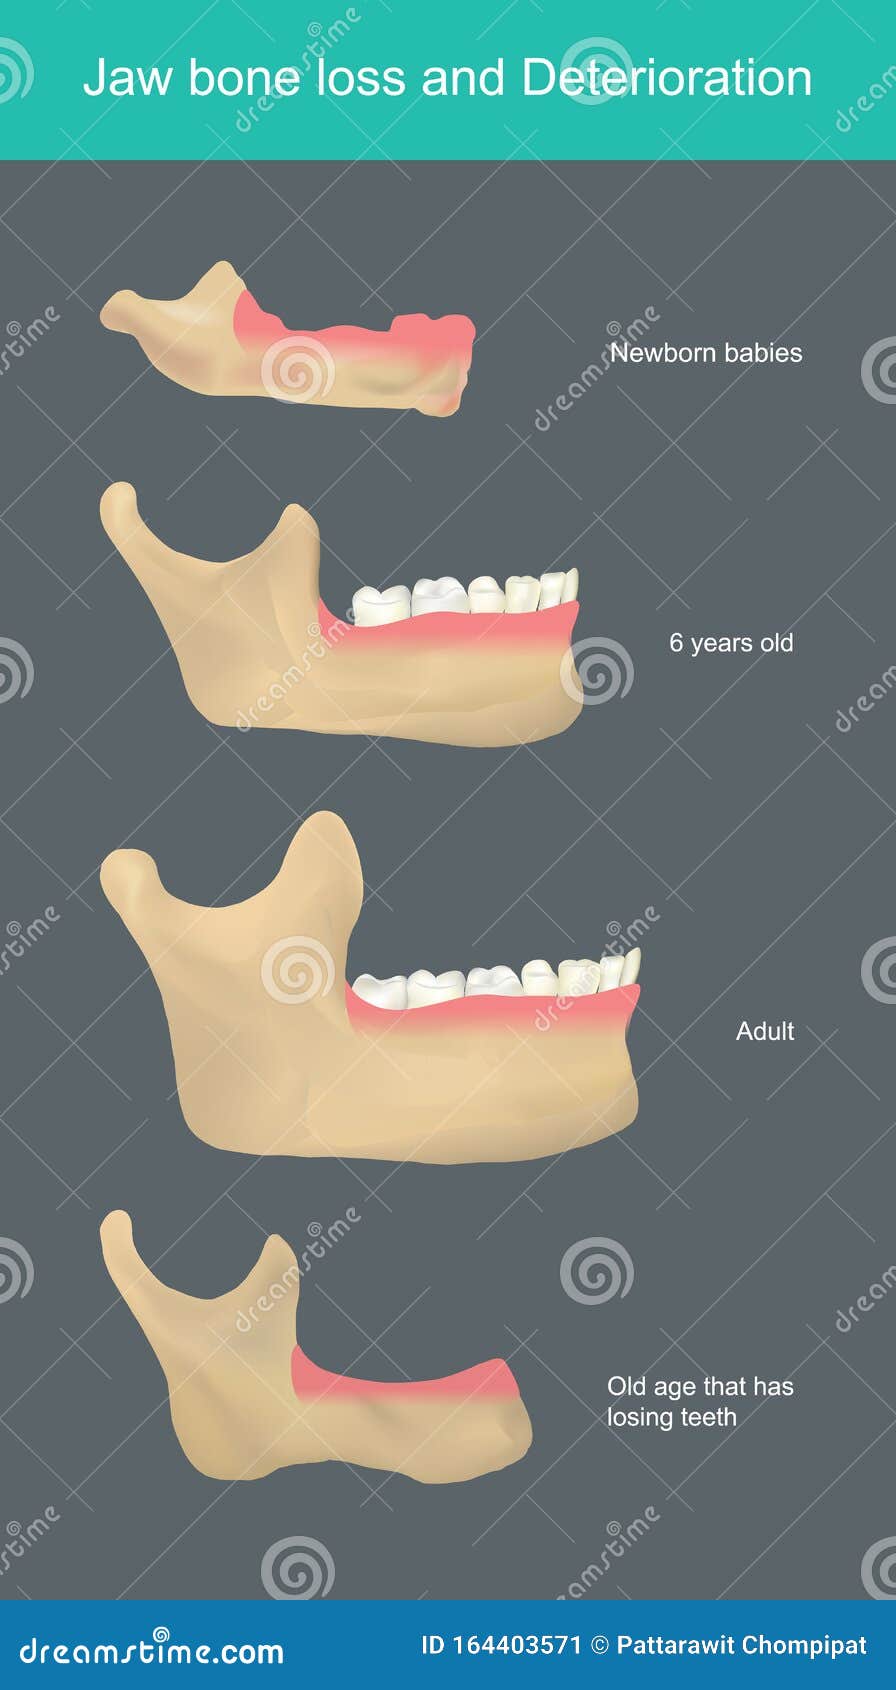 jaw bone loss and deterioration. .